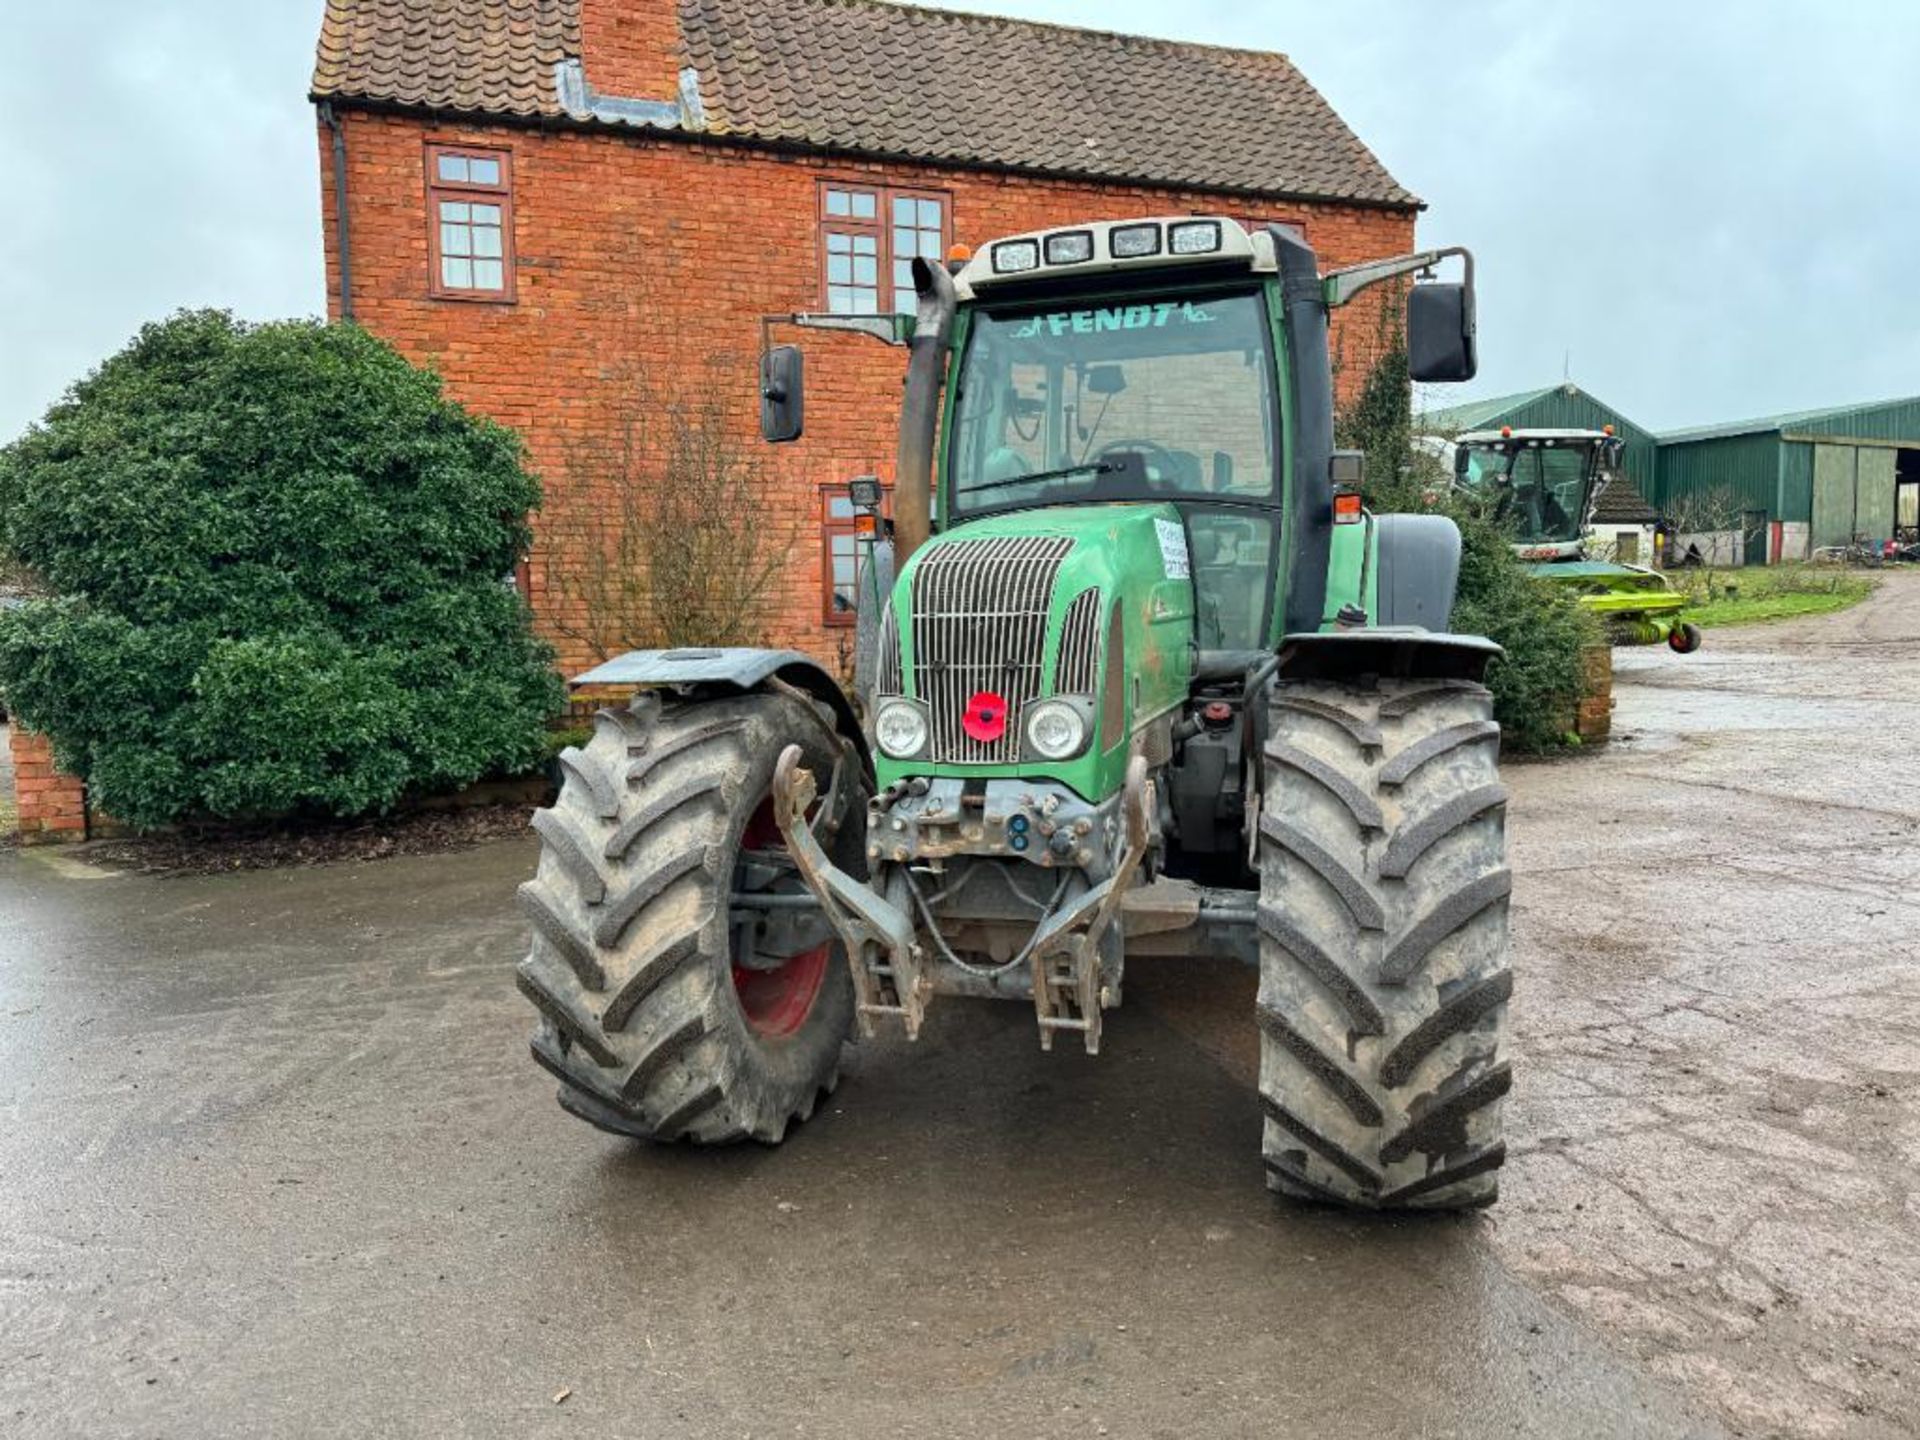 2001 Fendt 716 Vario 50kph 4wd tractor with 4 electric spools, air brakes and front linkage on BKT 5 - Image 5 of 22